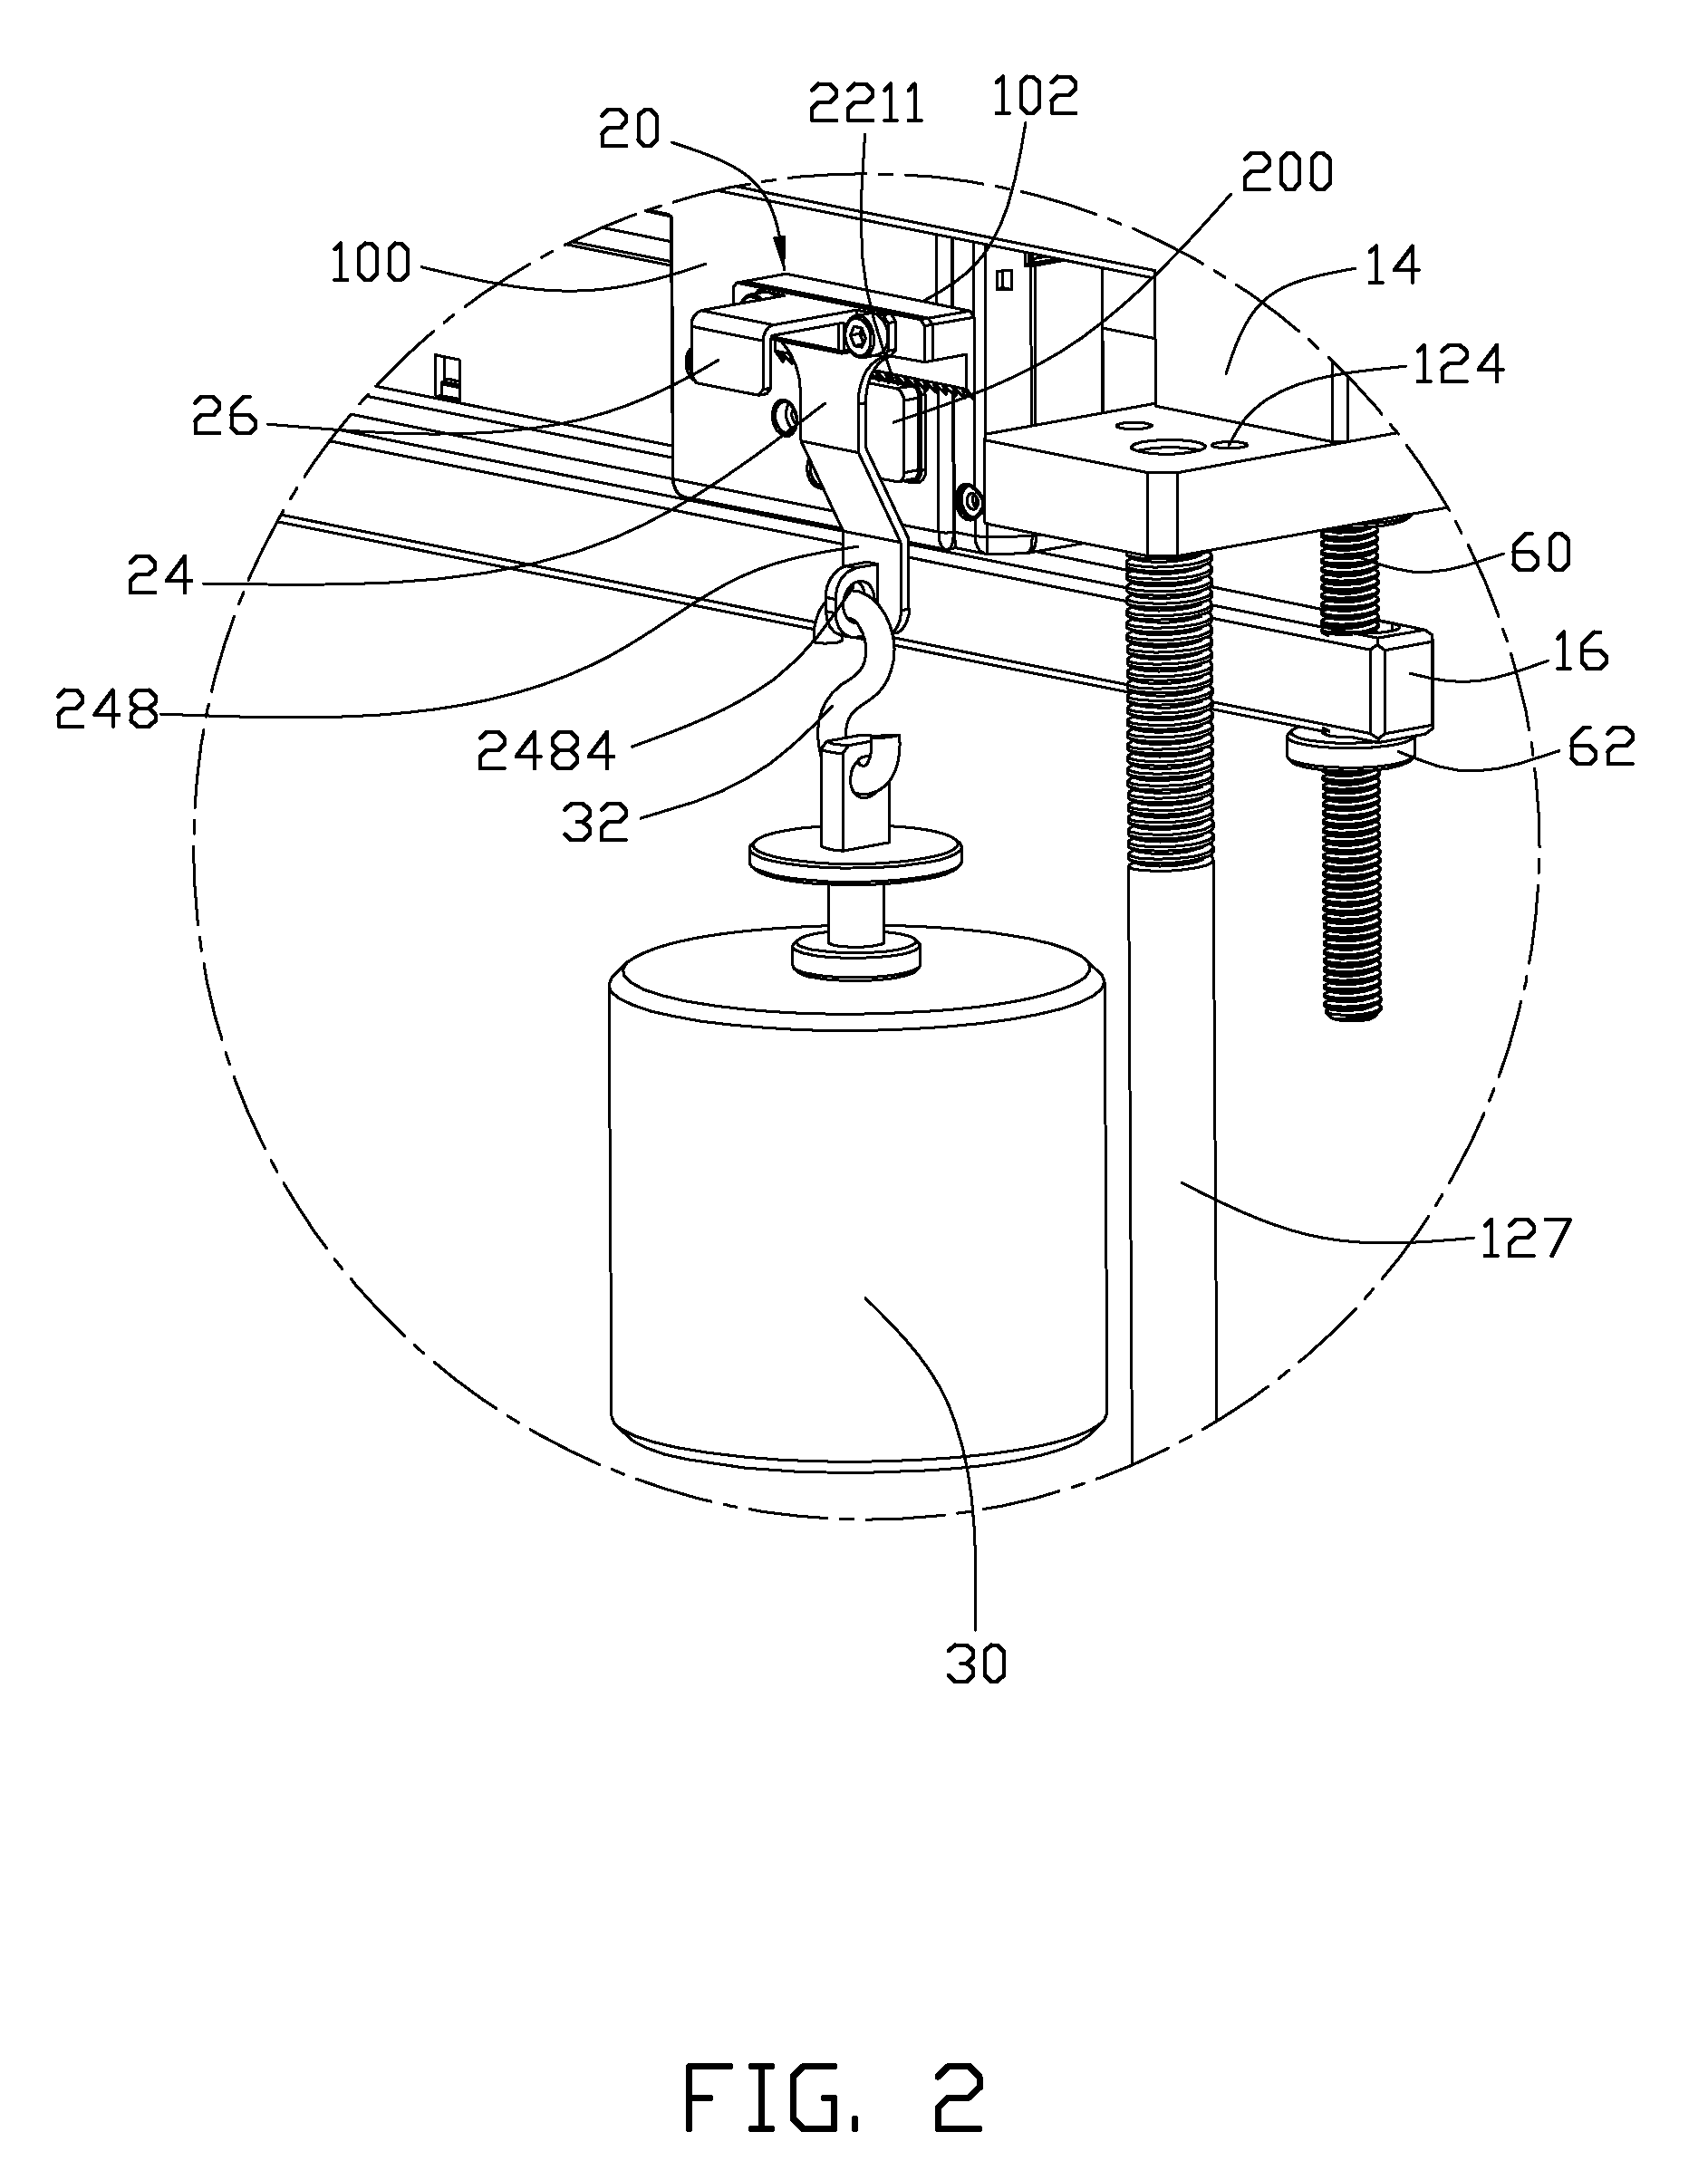 Connection strength testing device